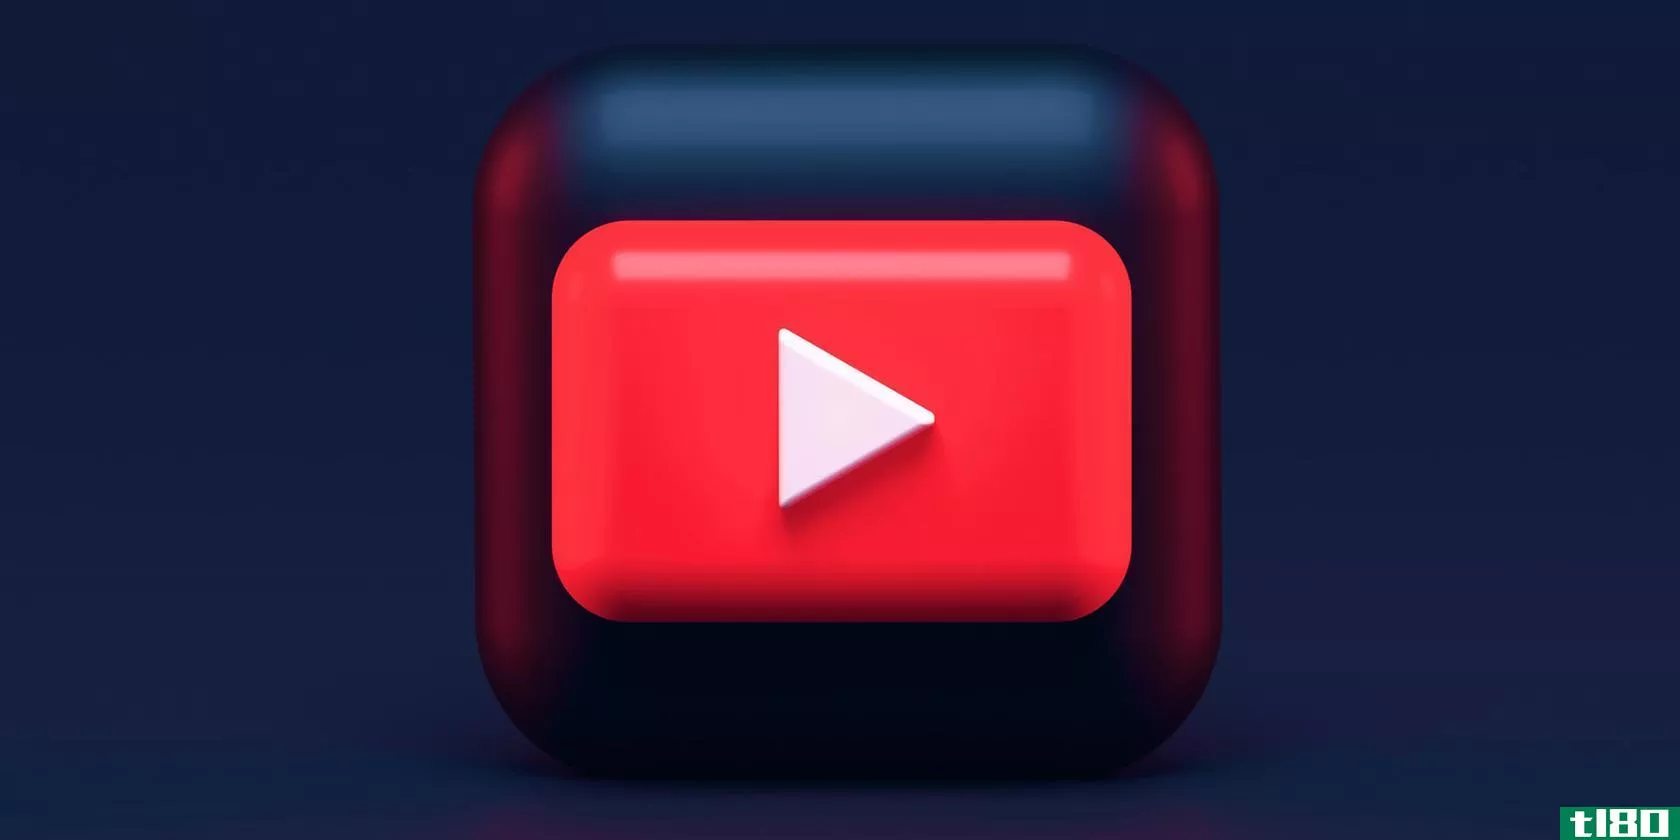 A 3D icon of the YouTube logo